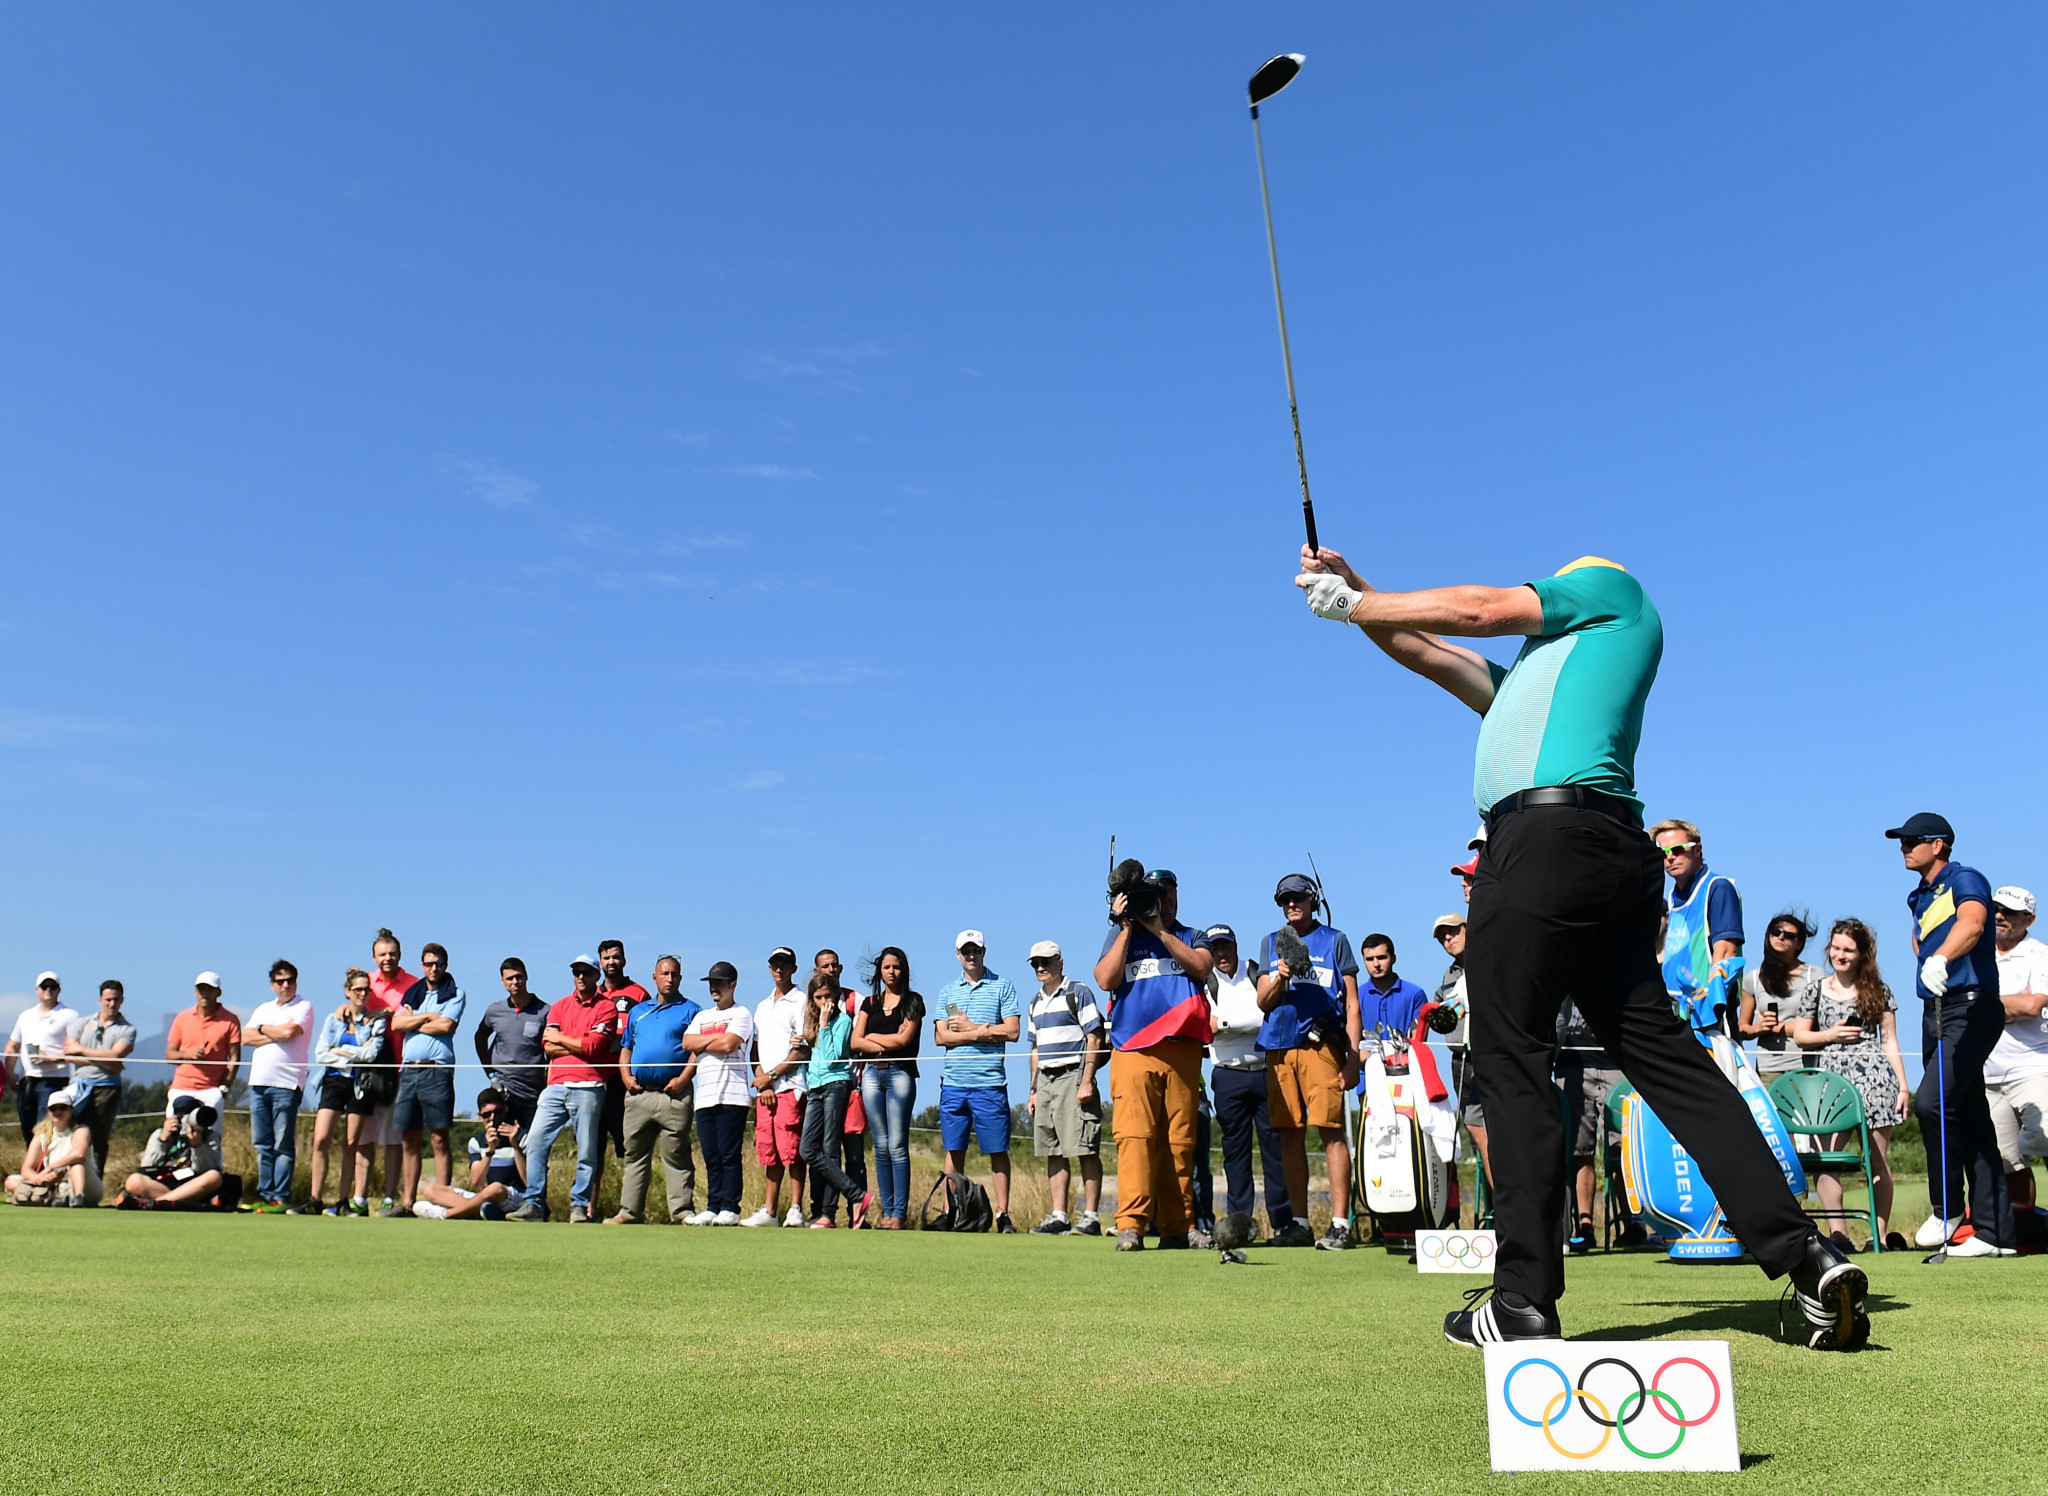 Olympic qualifying window for golf extended by one year